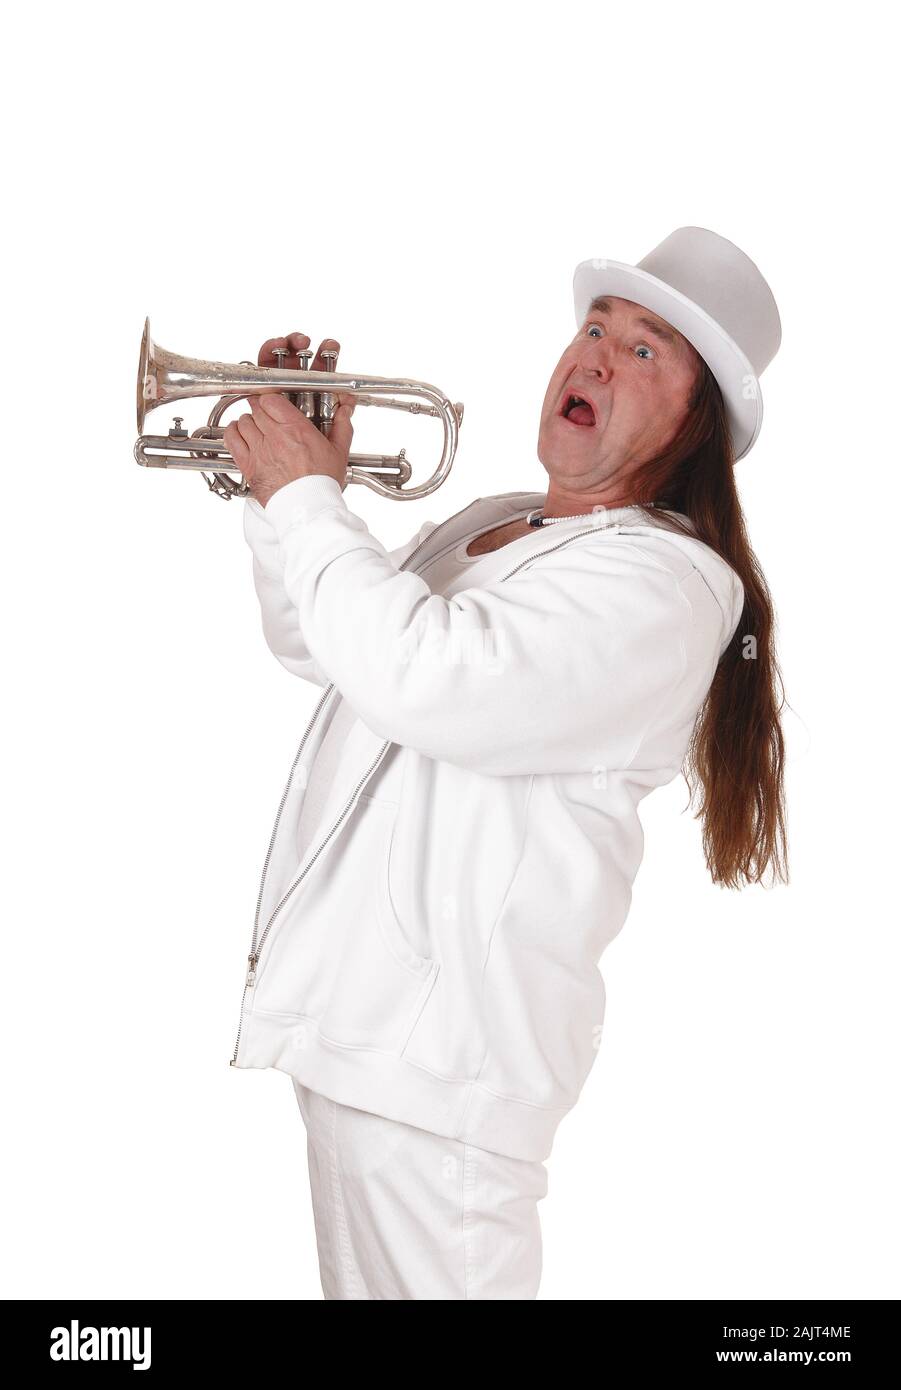 A middle age indigenous man standing in a white outfit and white hat holding his trumpet and screaming, isolated for white background Stock Photo